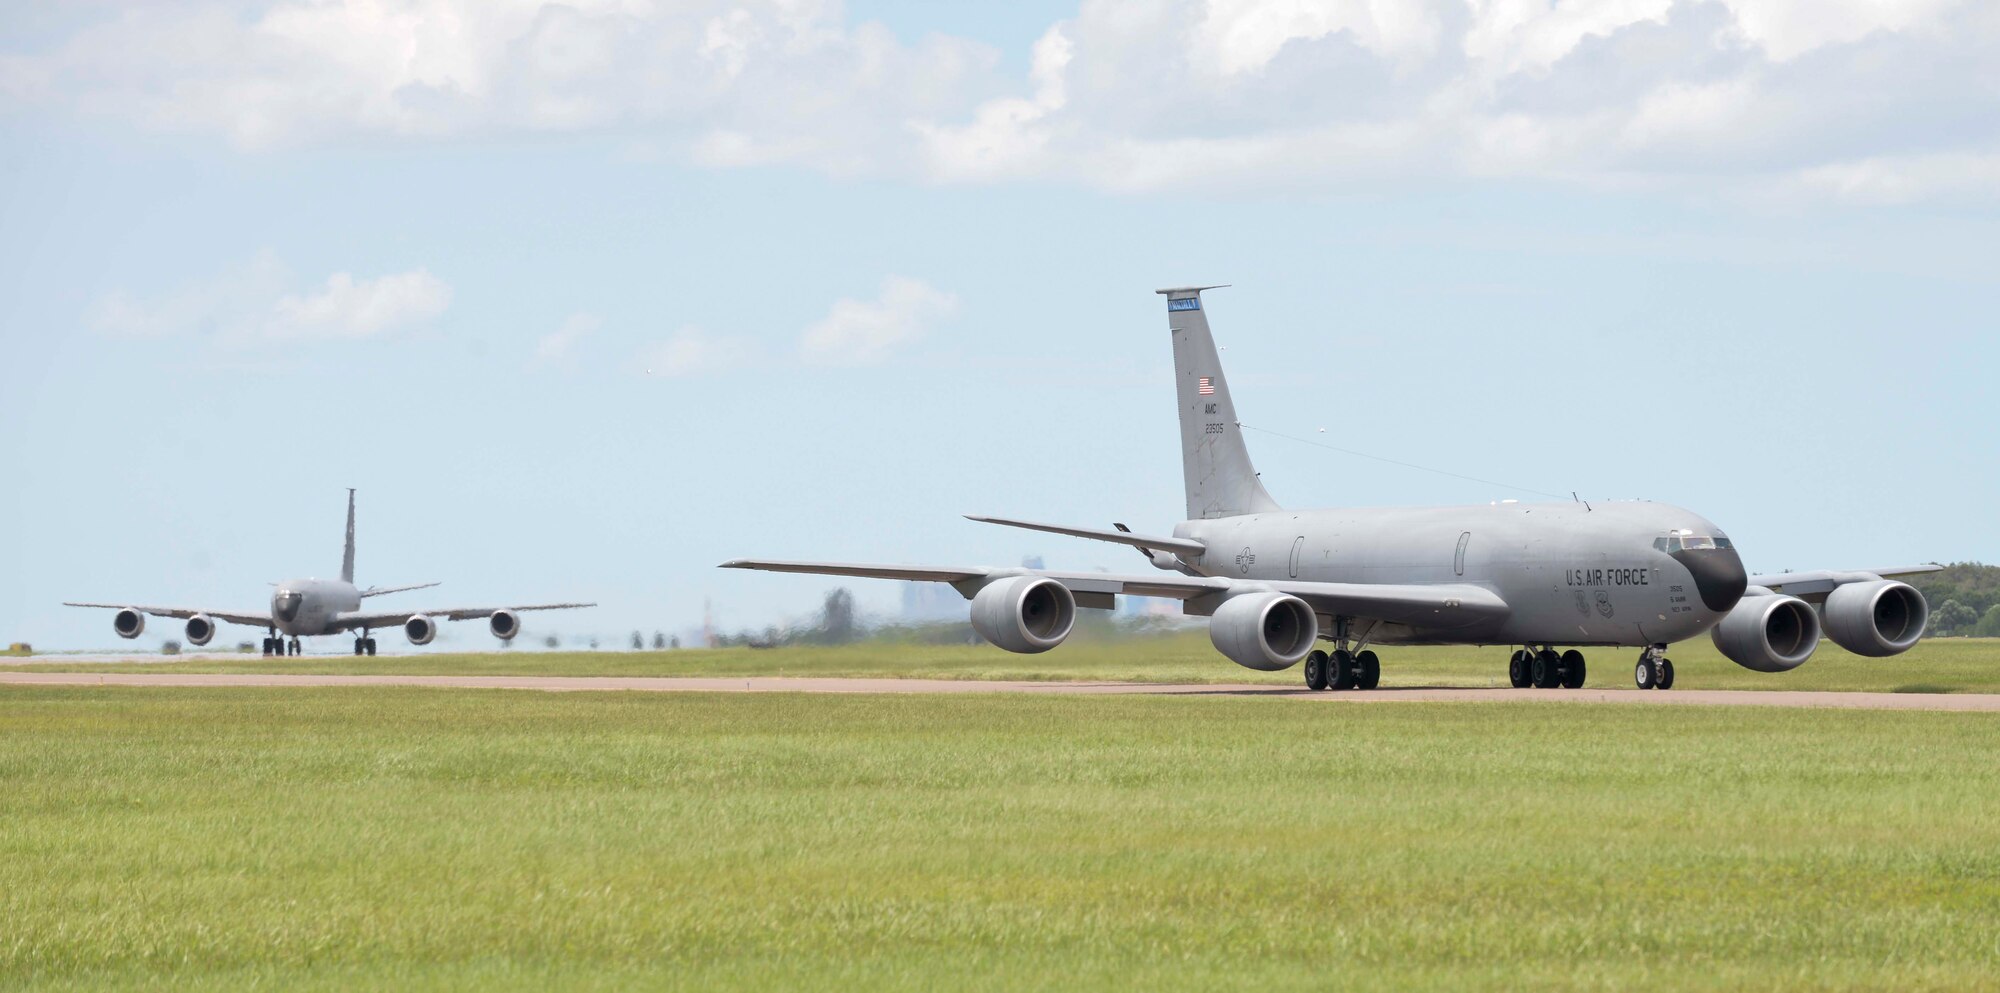 Two KC-135 Stratotankers taxi down the runway during a generation exercise at MacDill Air Force Base, Fla., Aug. 17, 2016. A generation exercise is performed to ensure that all facets of the 6th Air Mobility Wing are mission ready at a moment’s notice. (U.S. Air Force photo by Senior Airman Vernon L. Fowler Jr.)